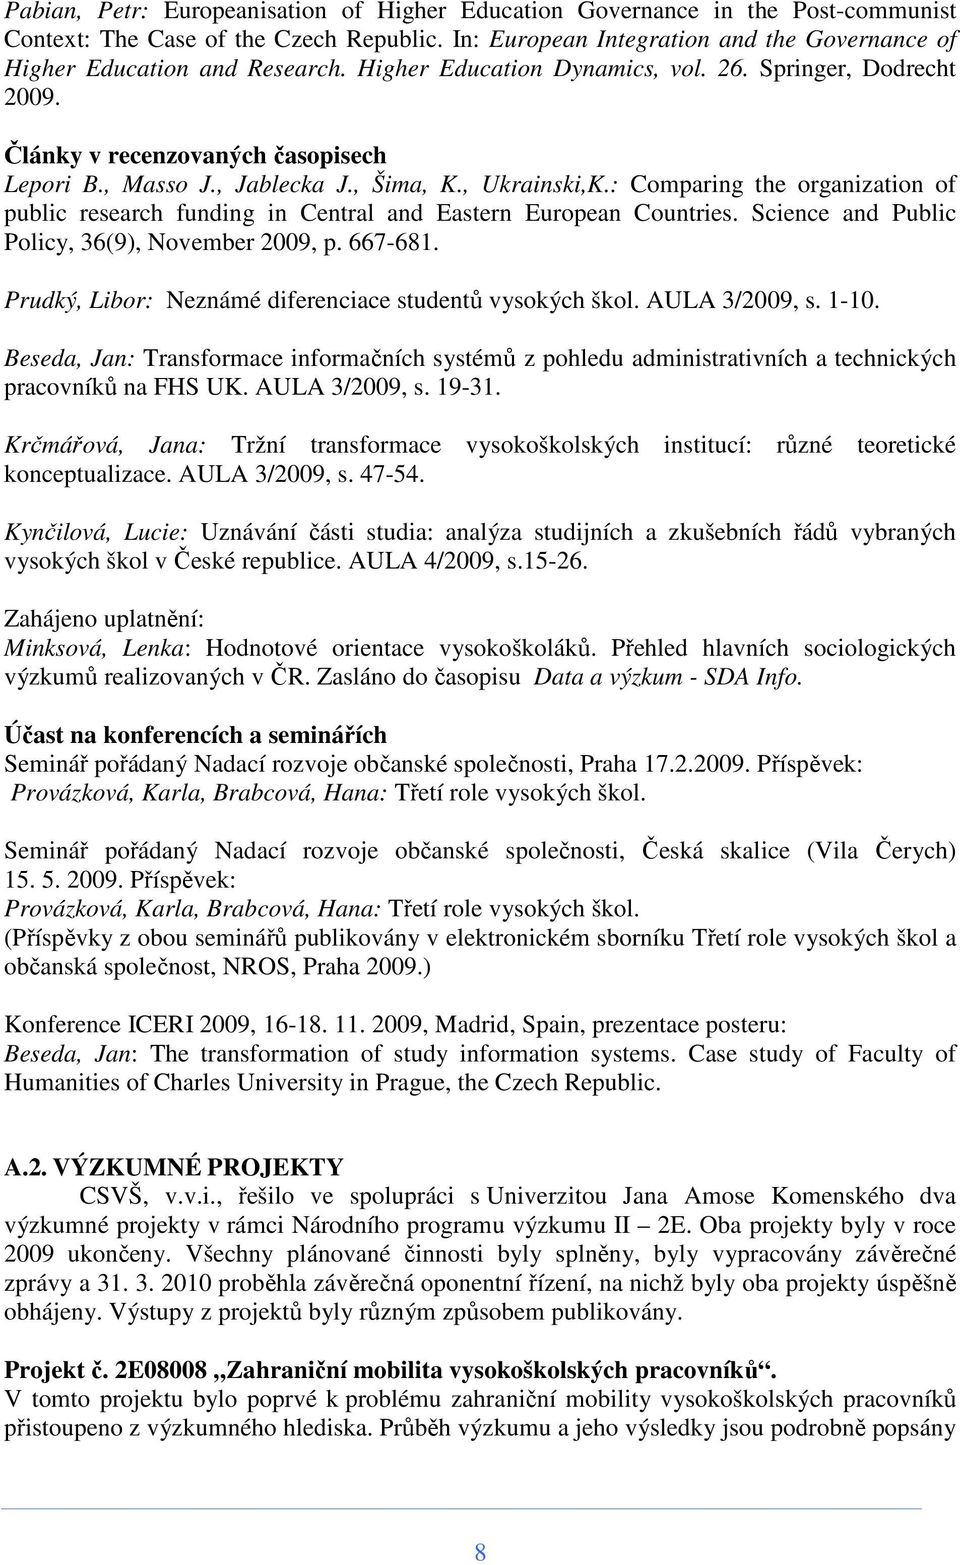 , Jablecka J., Šima, K., Ukrainski,K.: Comparing the organization of public research funding in Central and Eastern European Countries. Science and Public Policy, 36(9), November 2009, p. 667-681.